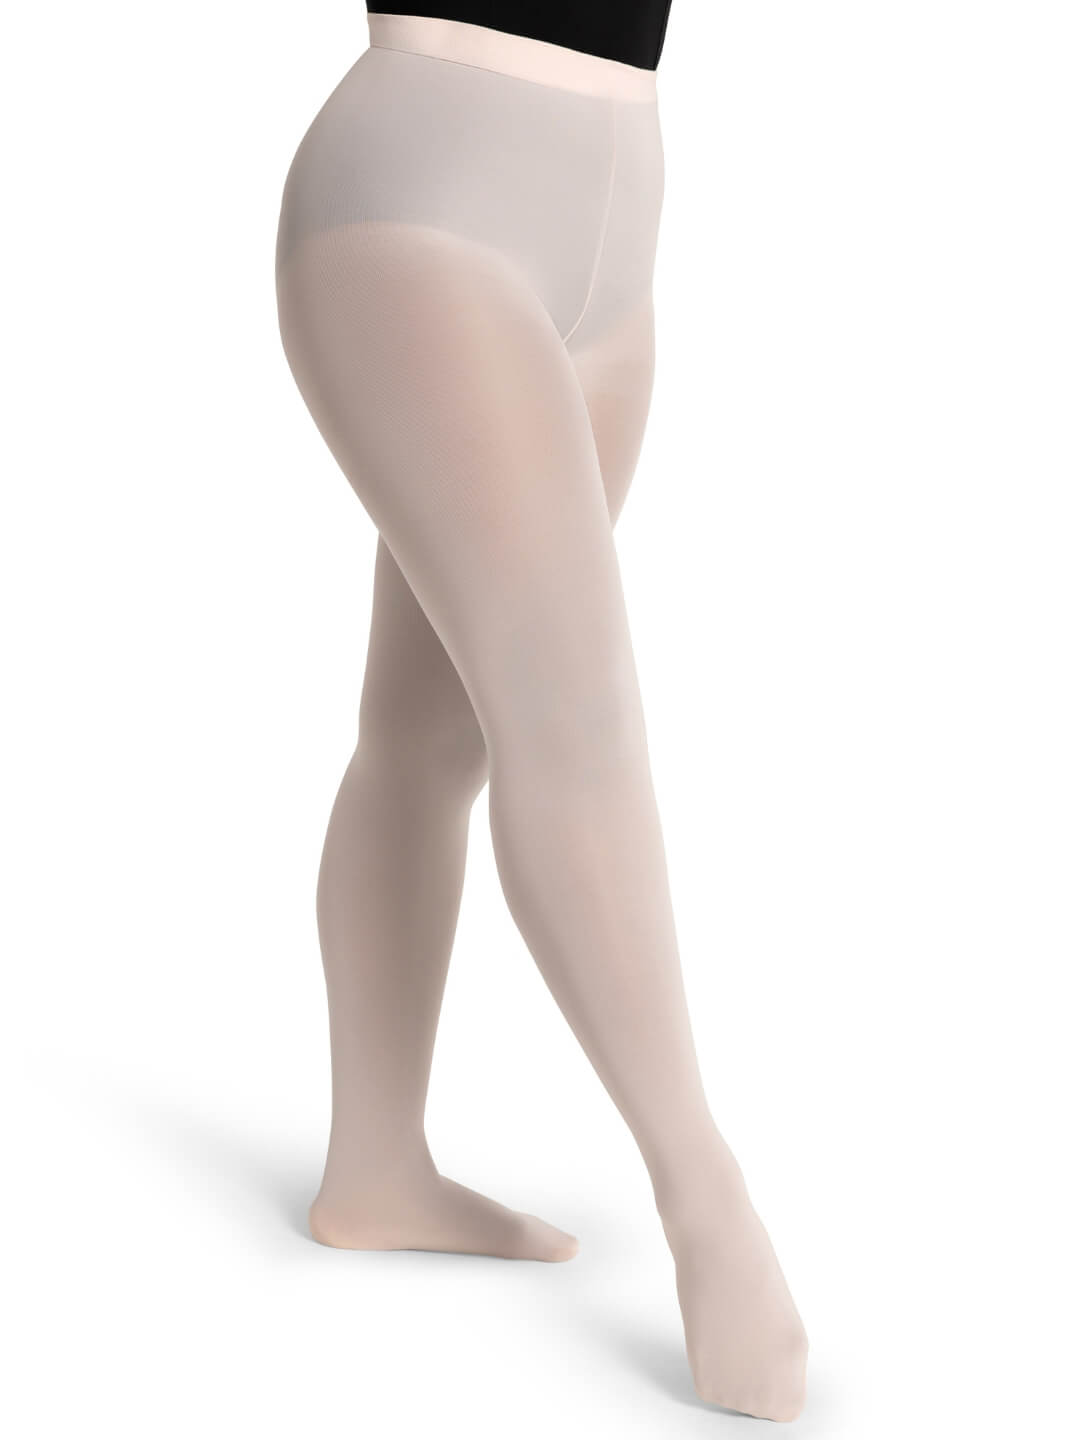 Girls Studio Basics Footed Tights - Footed Tights, Capezio 1825C